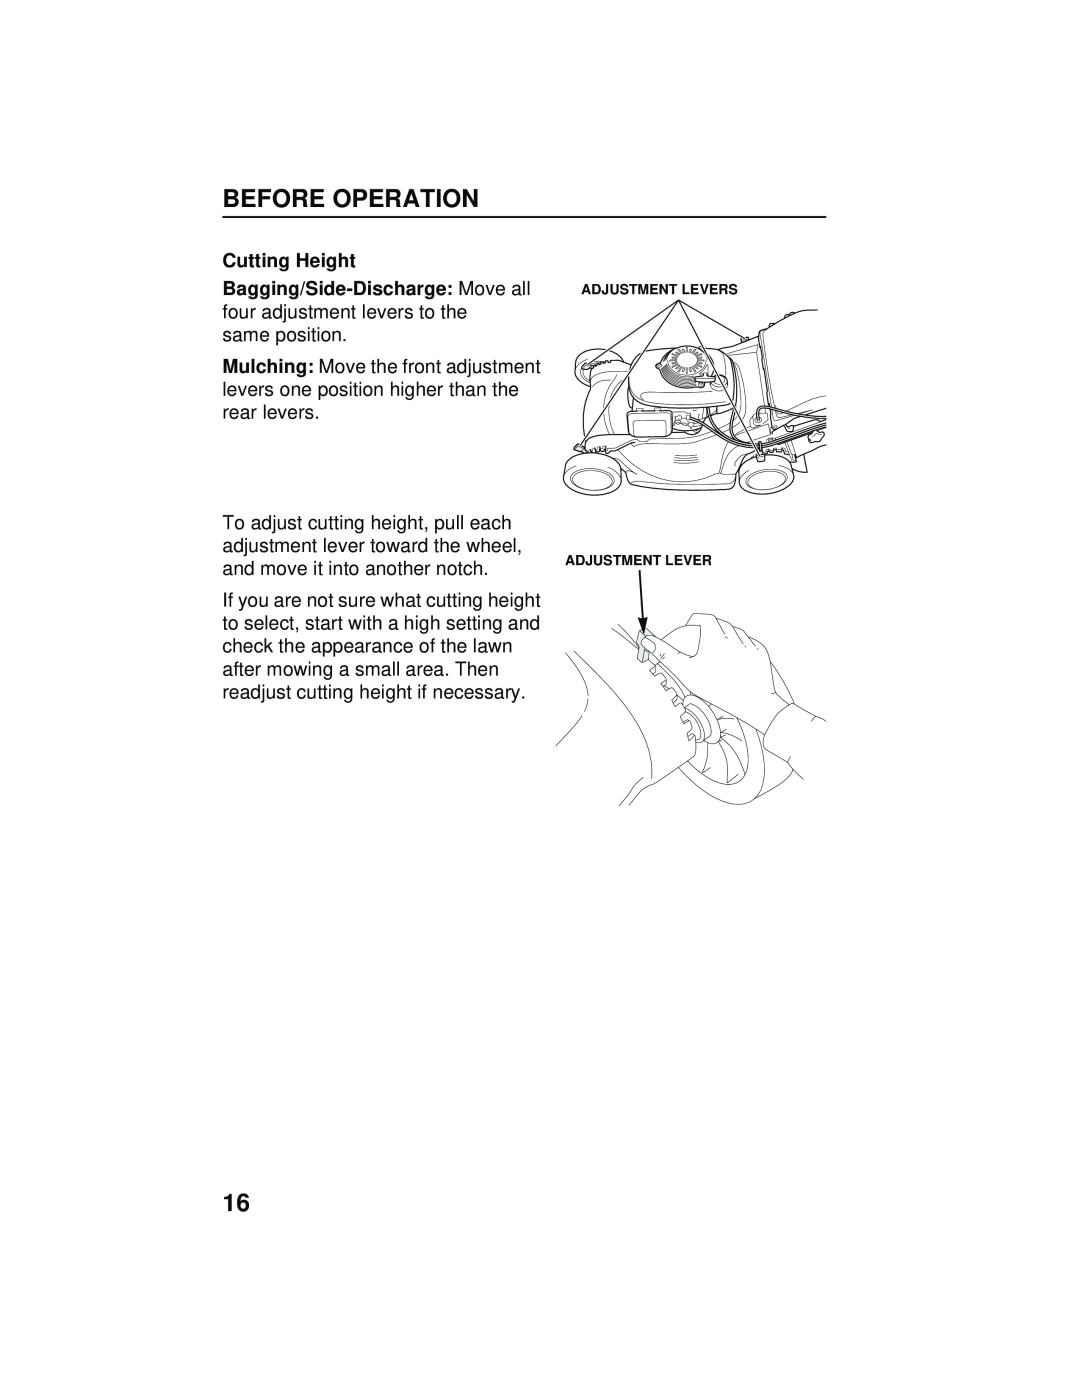 Honda Power Equipment HRB216TXA owner manual Cutting Height, and move it into another notch, Before Operation 